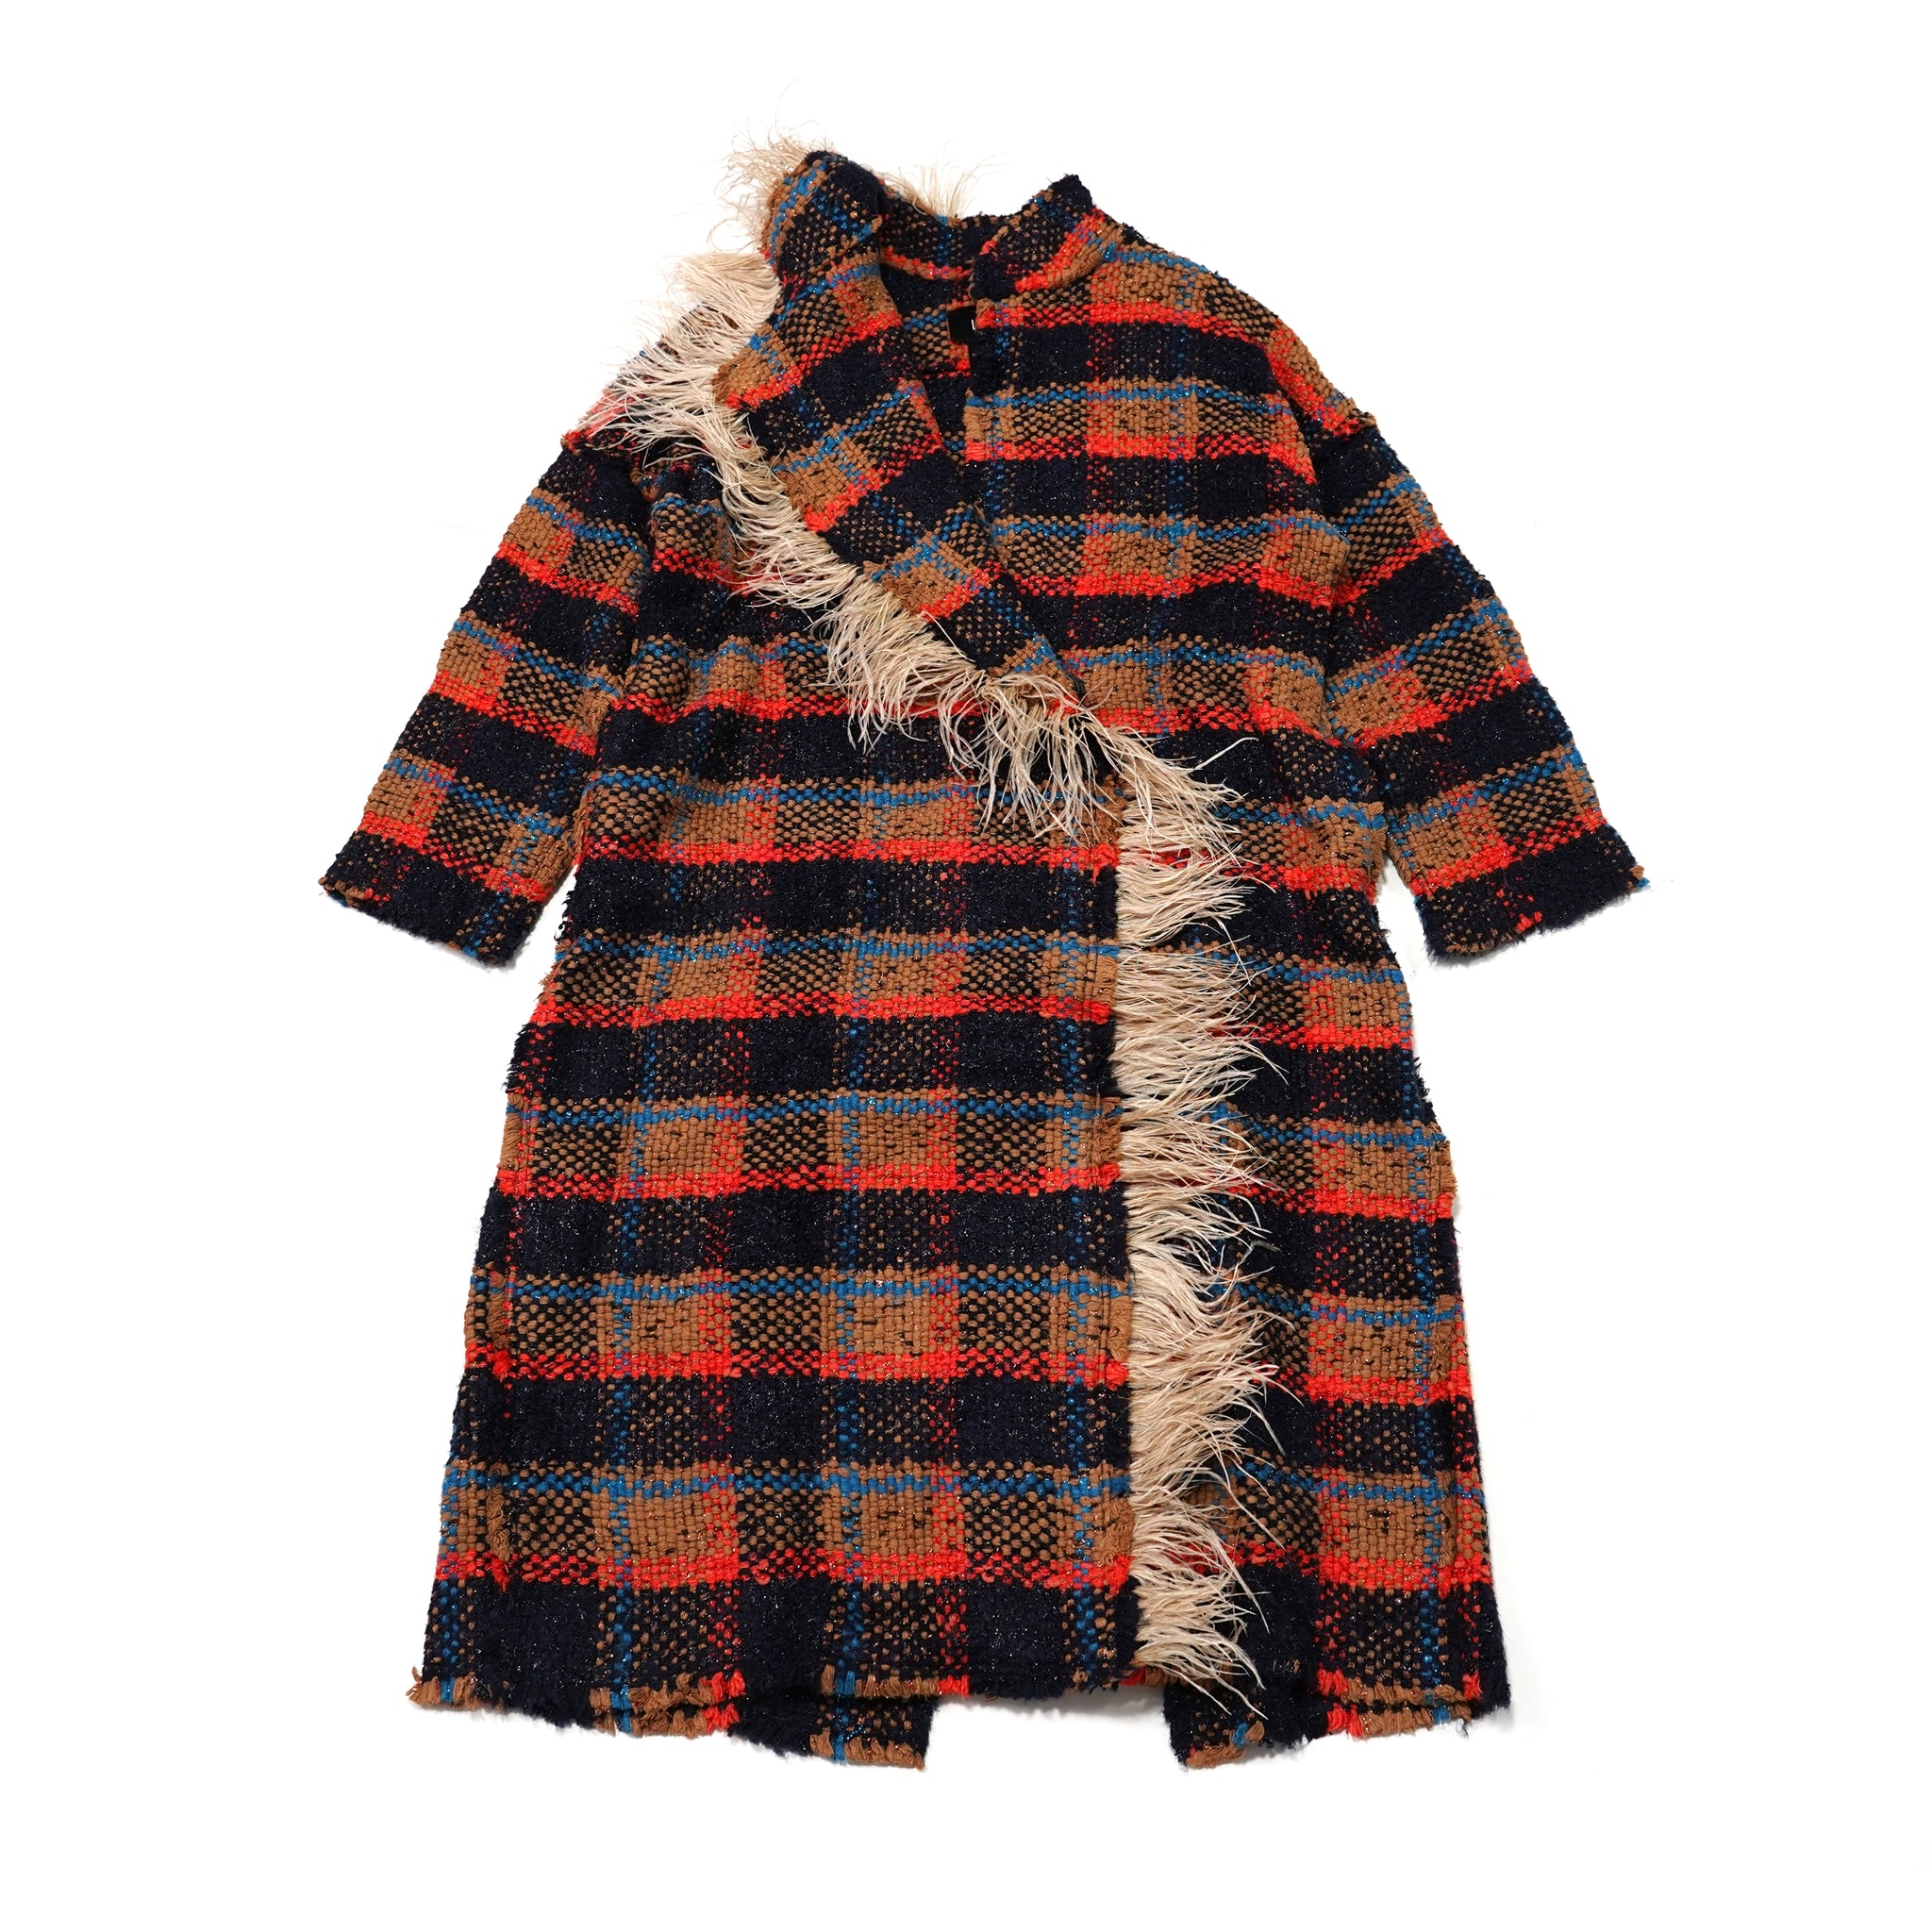 No:F12CO04 | Name:Coat | Color:Red Check | Size:S【LALO CARDIGANS_ラロカーディガンズ】